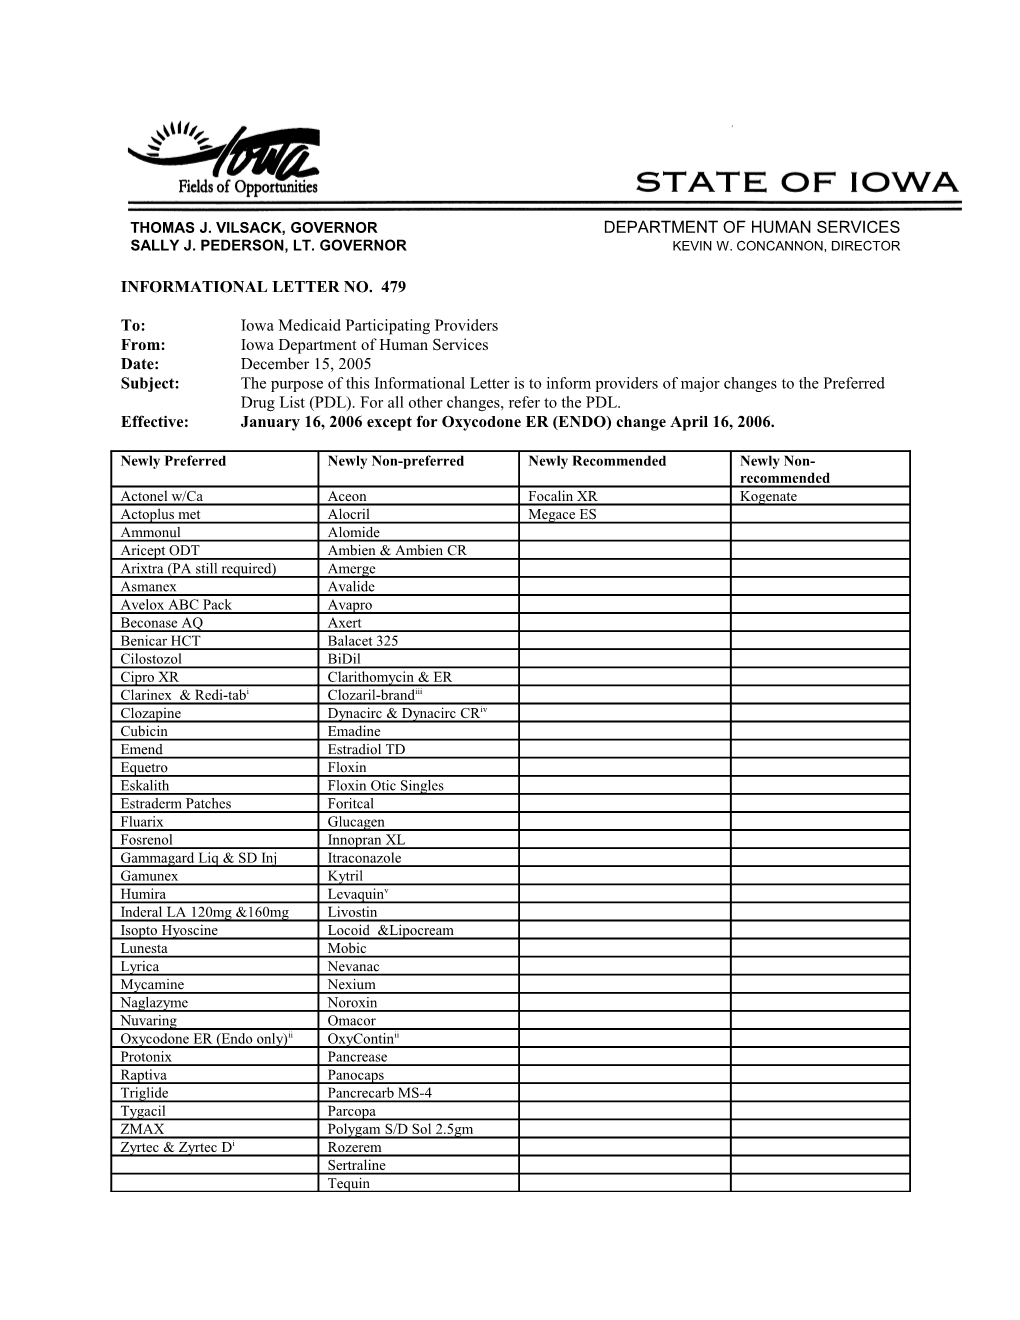 Department of Human Services Letterhead s6